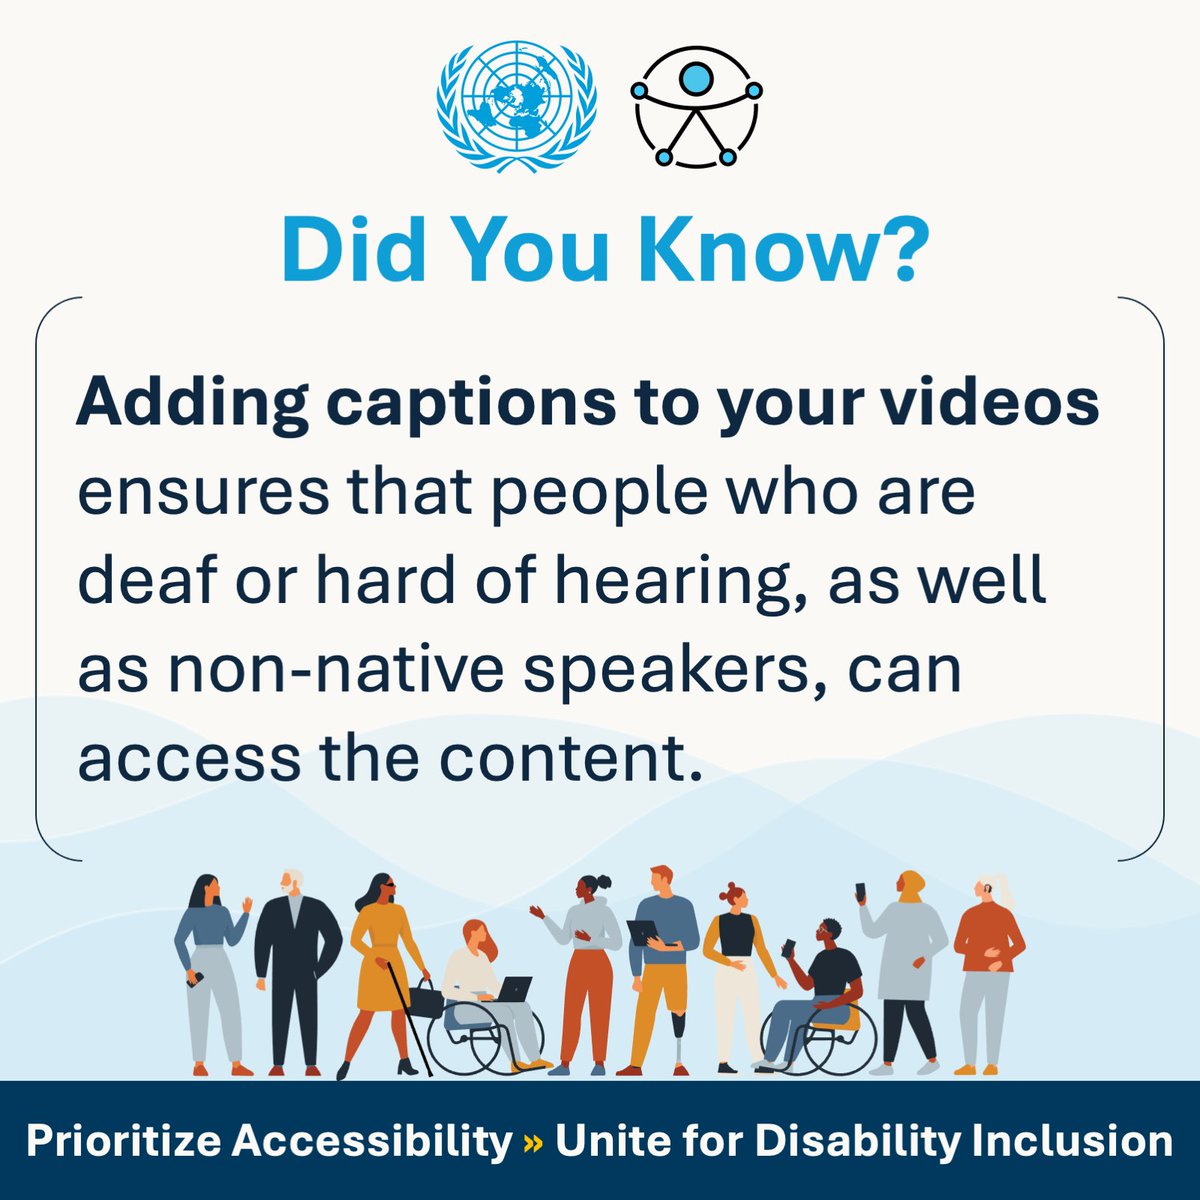 📢Captions aren't just for the hearing impaired —they're for everyone! Let's ensure our videos are accessible to all, regardless of language or ability. #Accessibility #DigitalInclusion